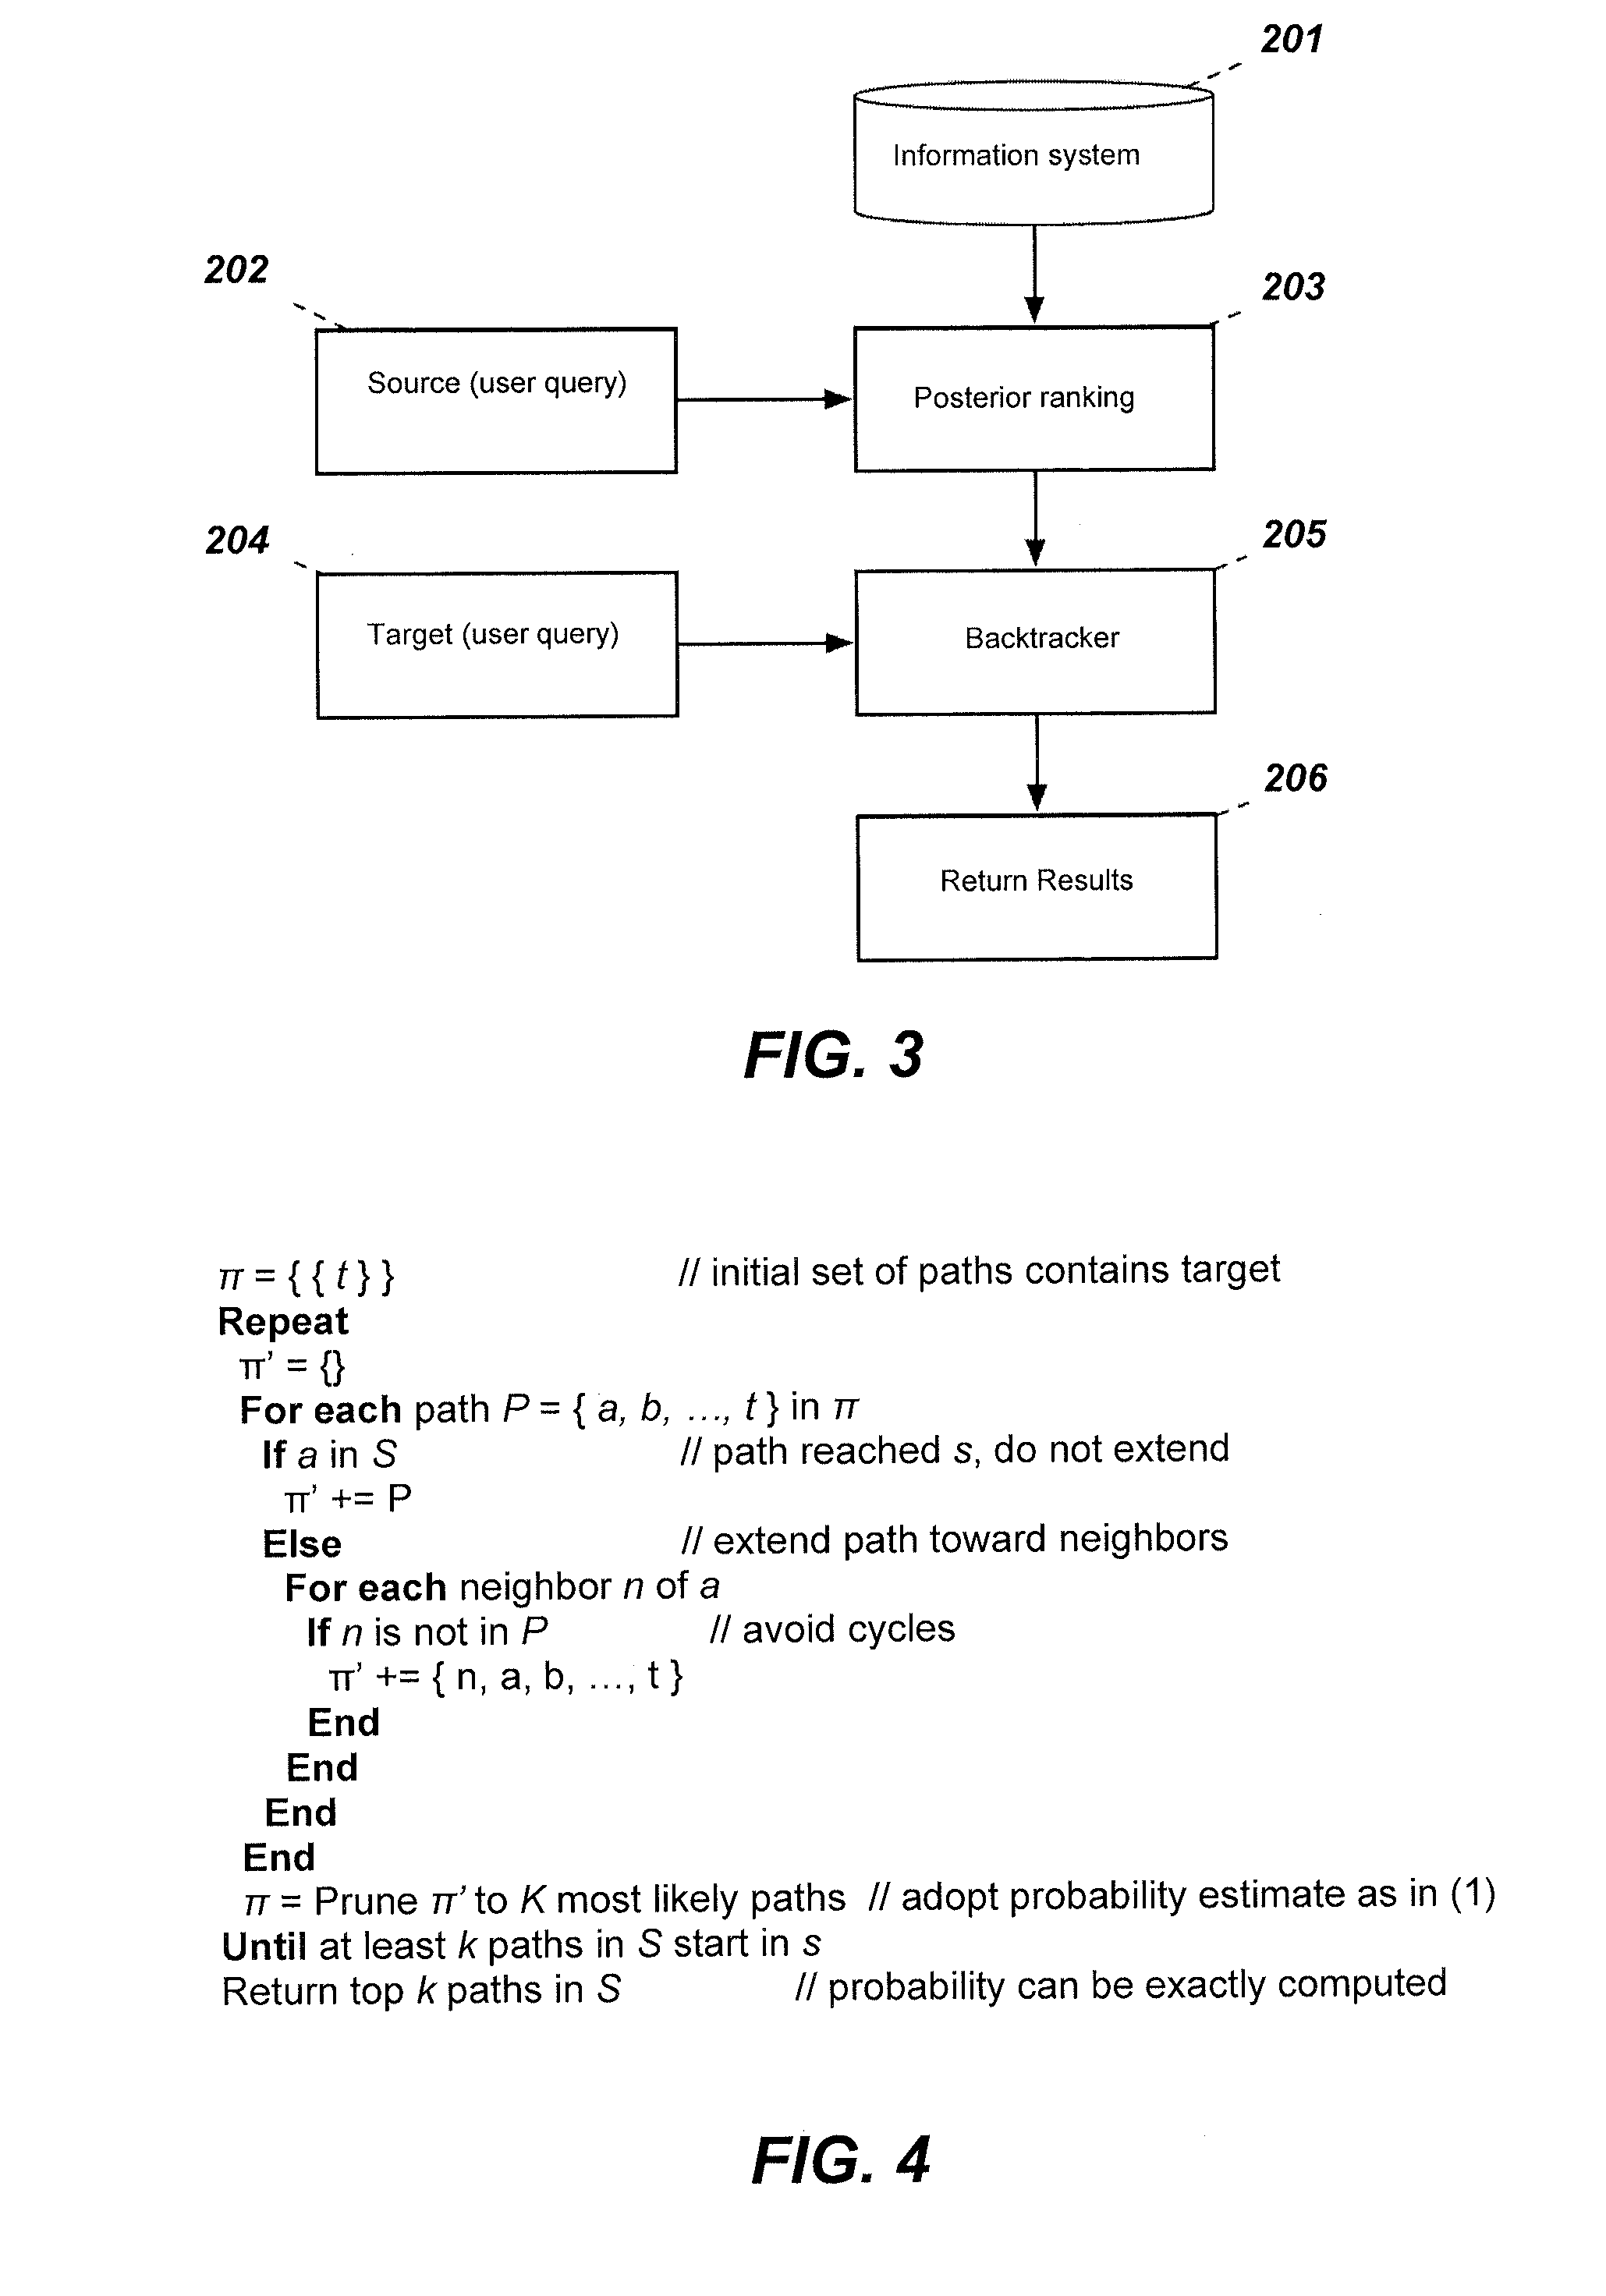 Method and system for using an information system